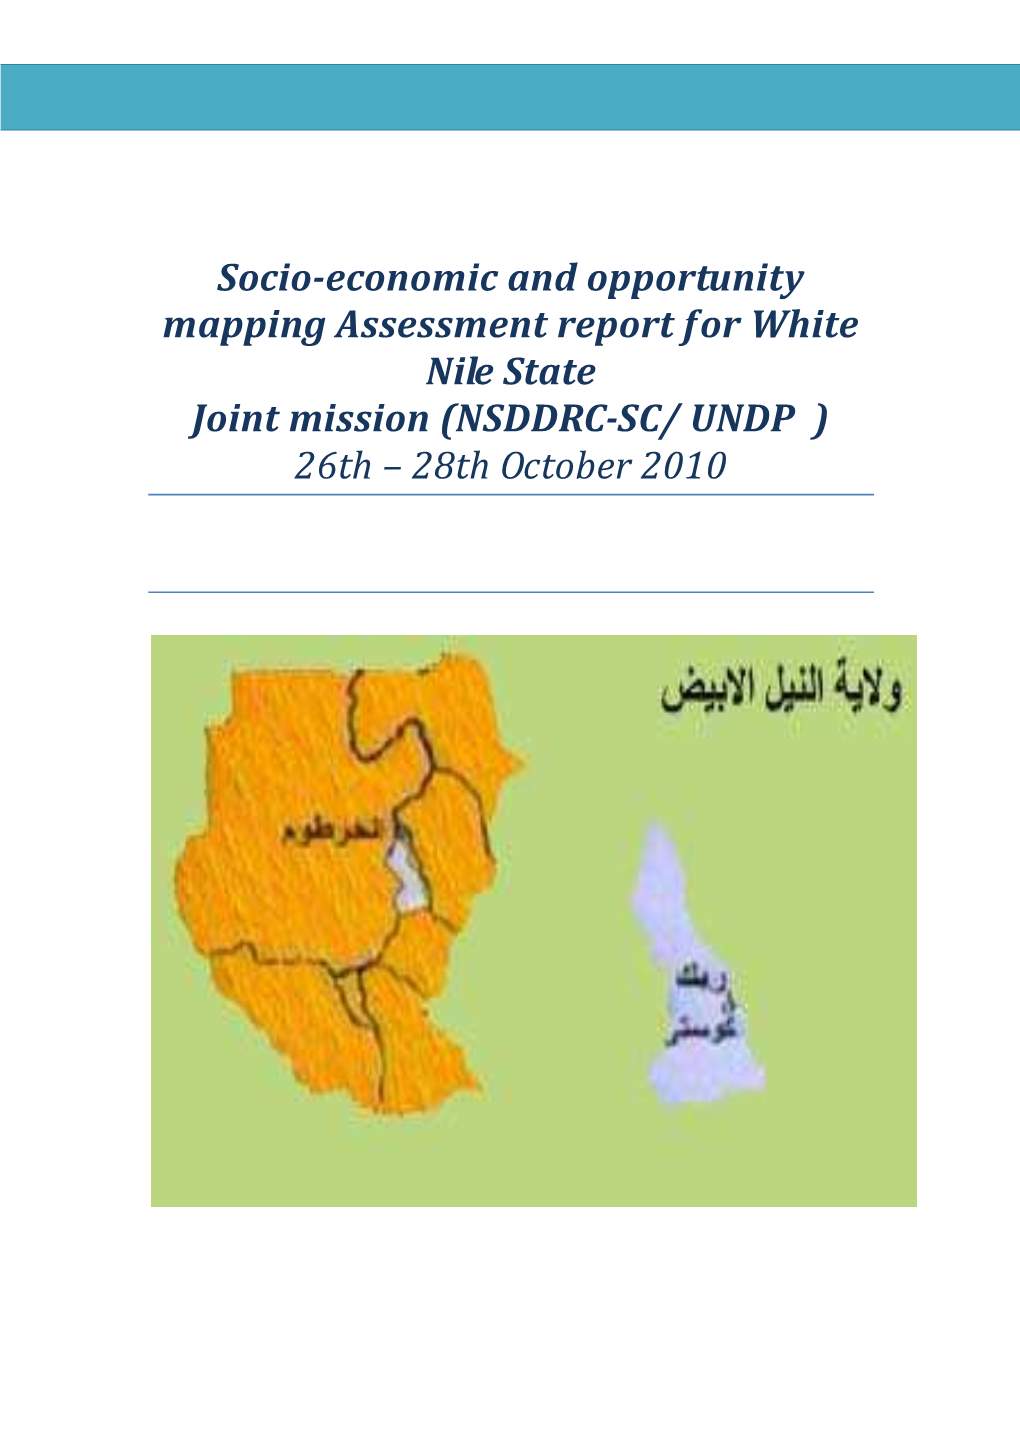 Report for Economic Mapping for White Nile State